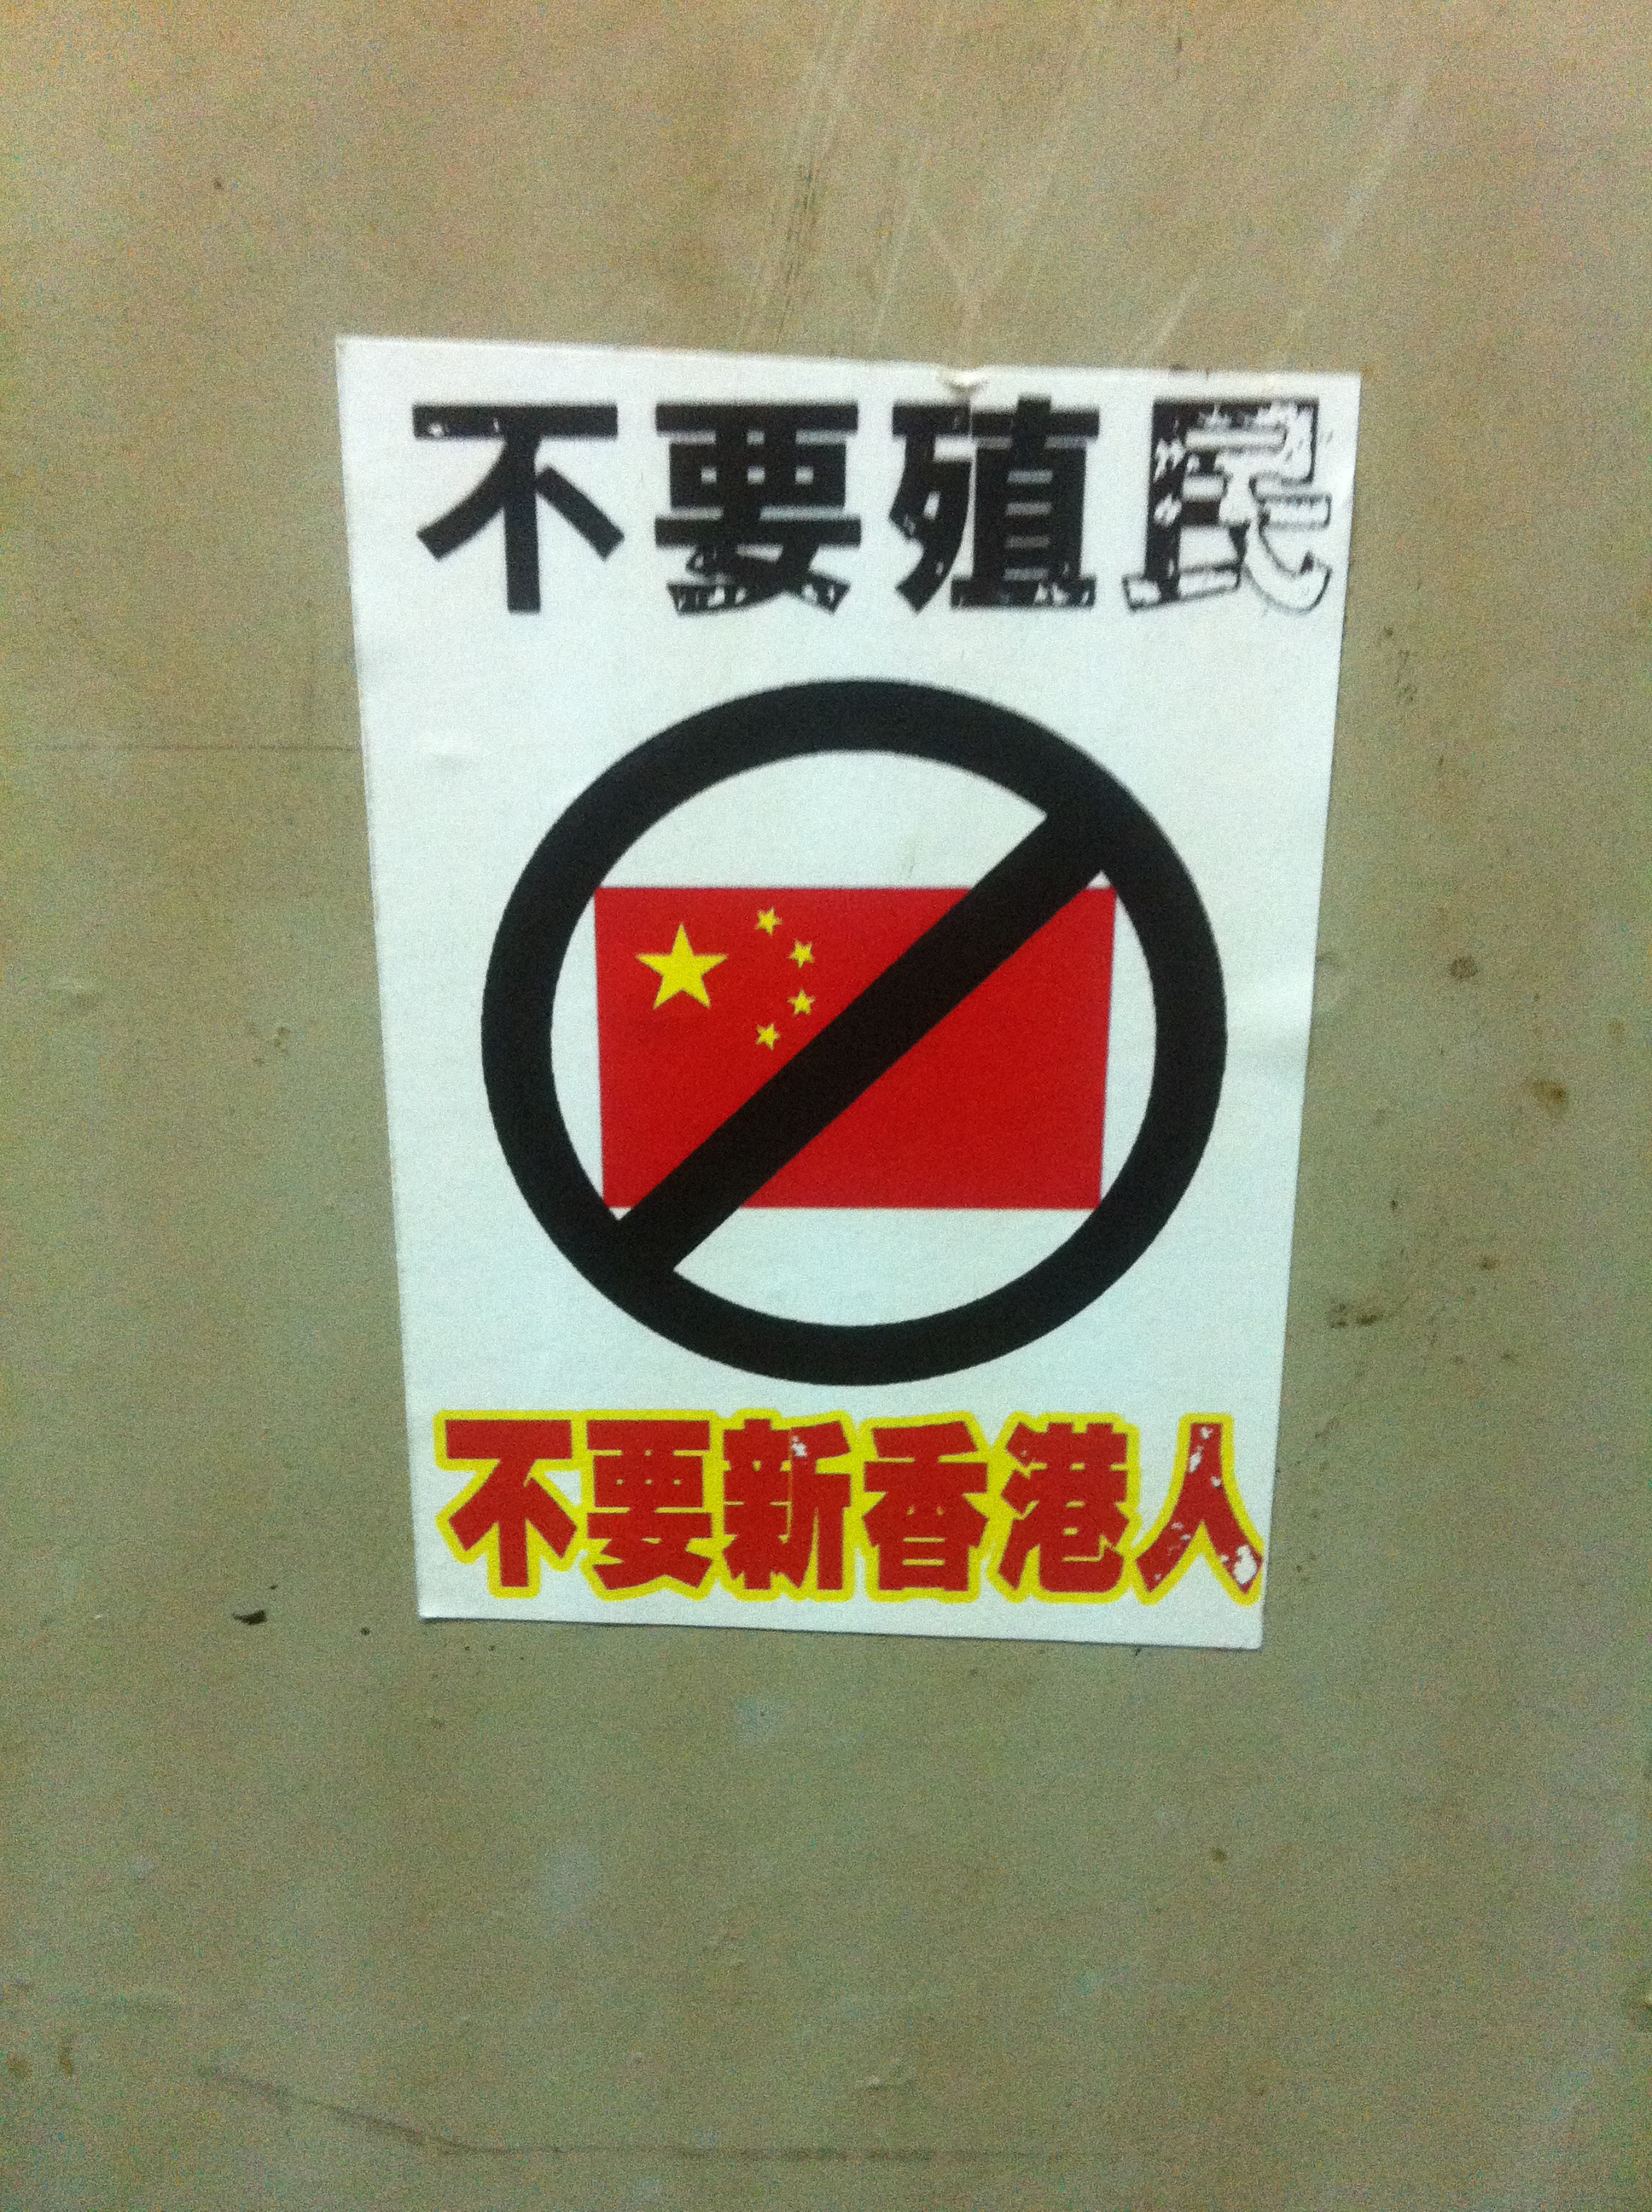 A flyer in the umbrella movement protesting "Colonialism" and "New Hong Kong People" -- i.e., mainlanders.